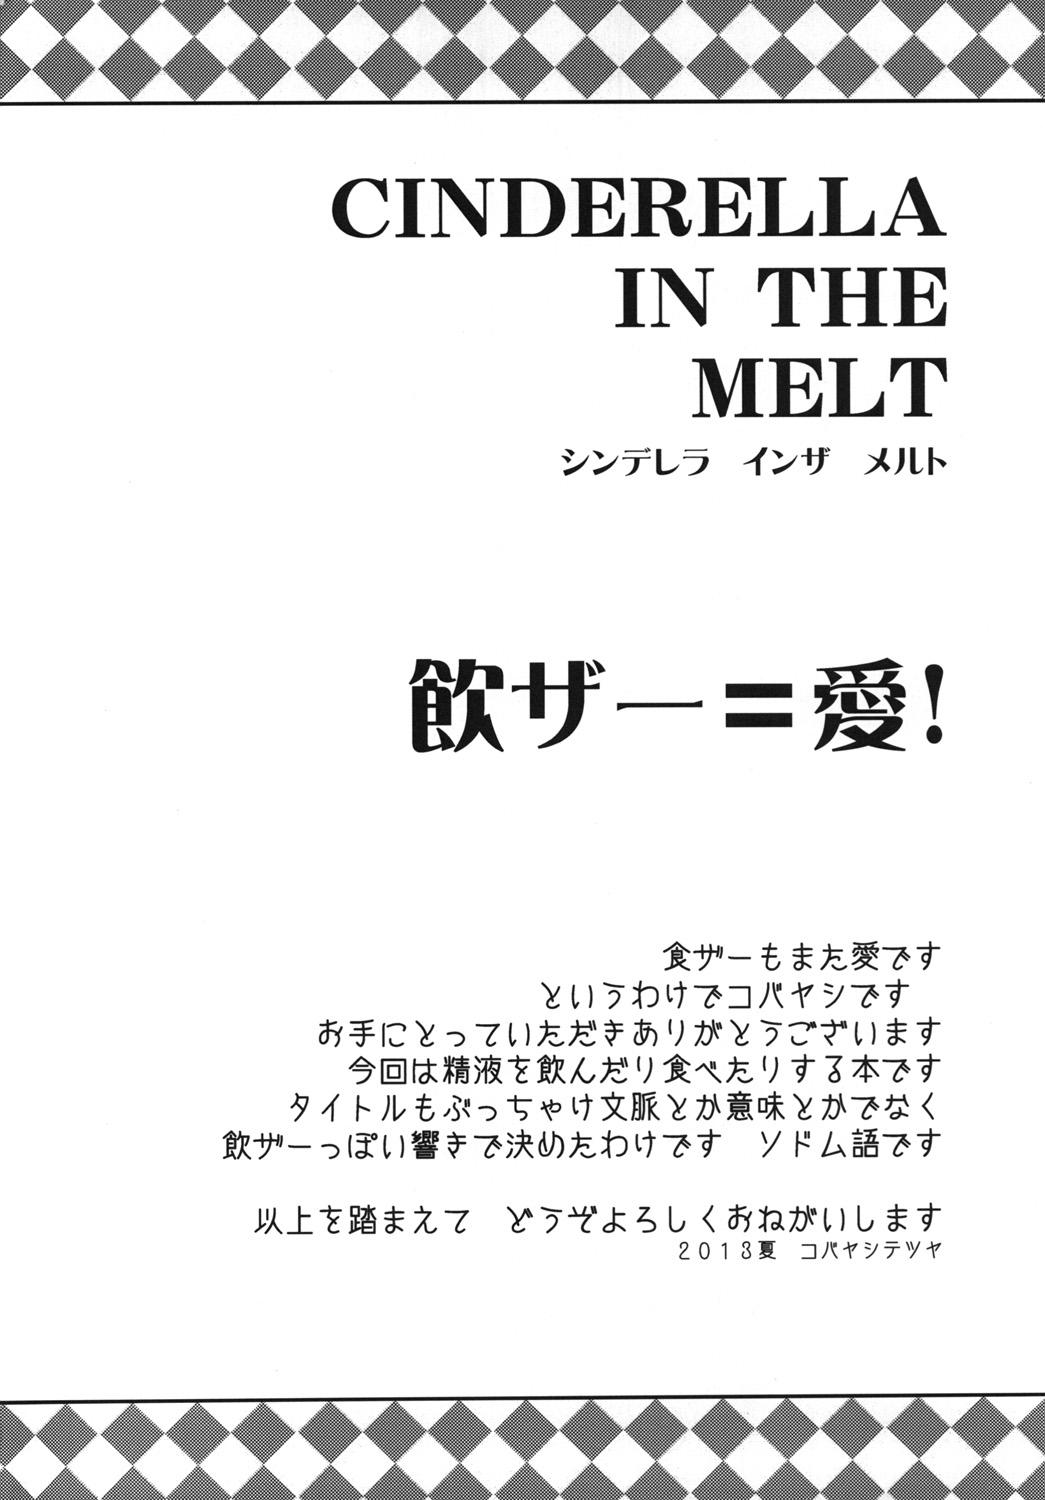 Gayclips CINDERELLA IN THE MELT - The idolmaster Blond - Page 3